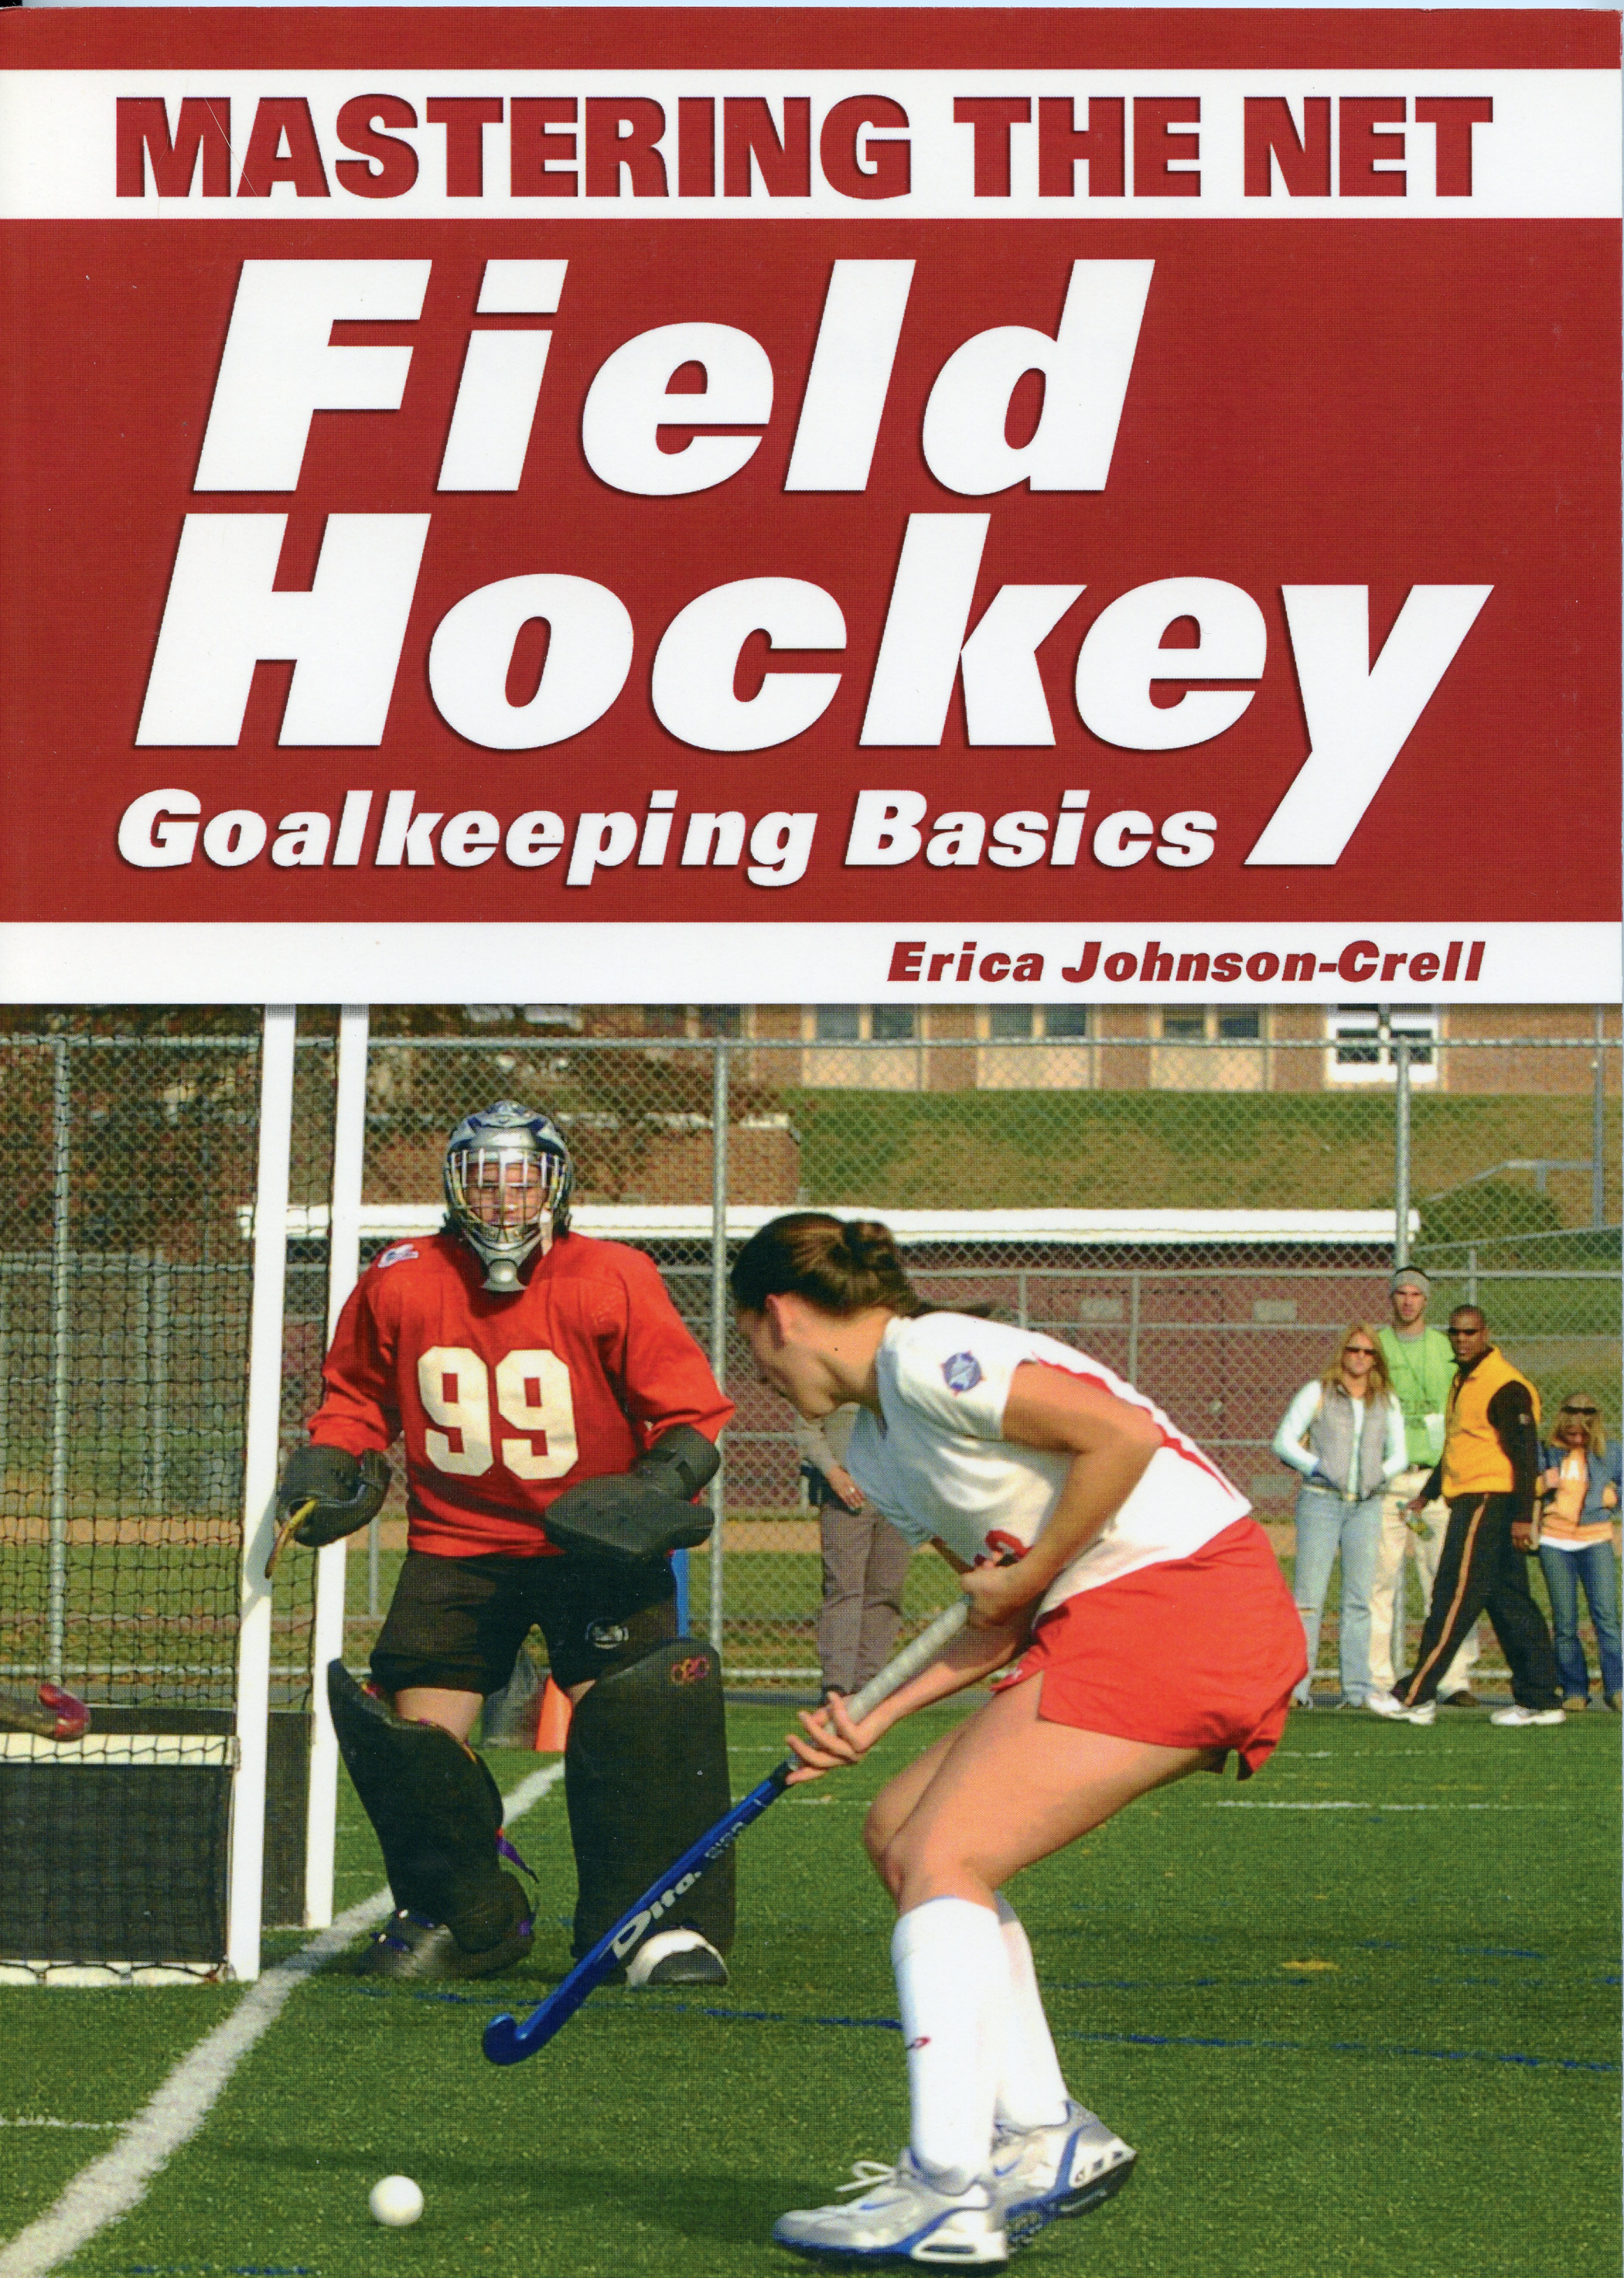 This book will help the beginner to intermediate goalkeeper succeed in the game and move to another level of play so that they can have proper technique and the confidence to execute those techniques in the game.

by Erica Crell
ISBN: 978-1930546-87-5
$16.95
Published in 2007